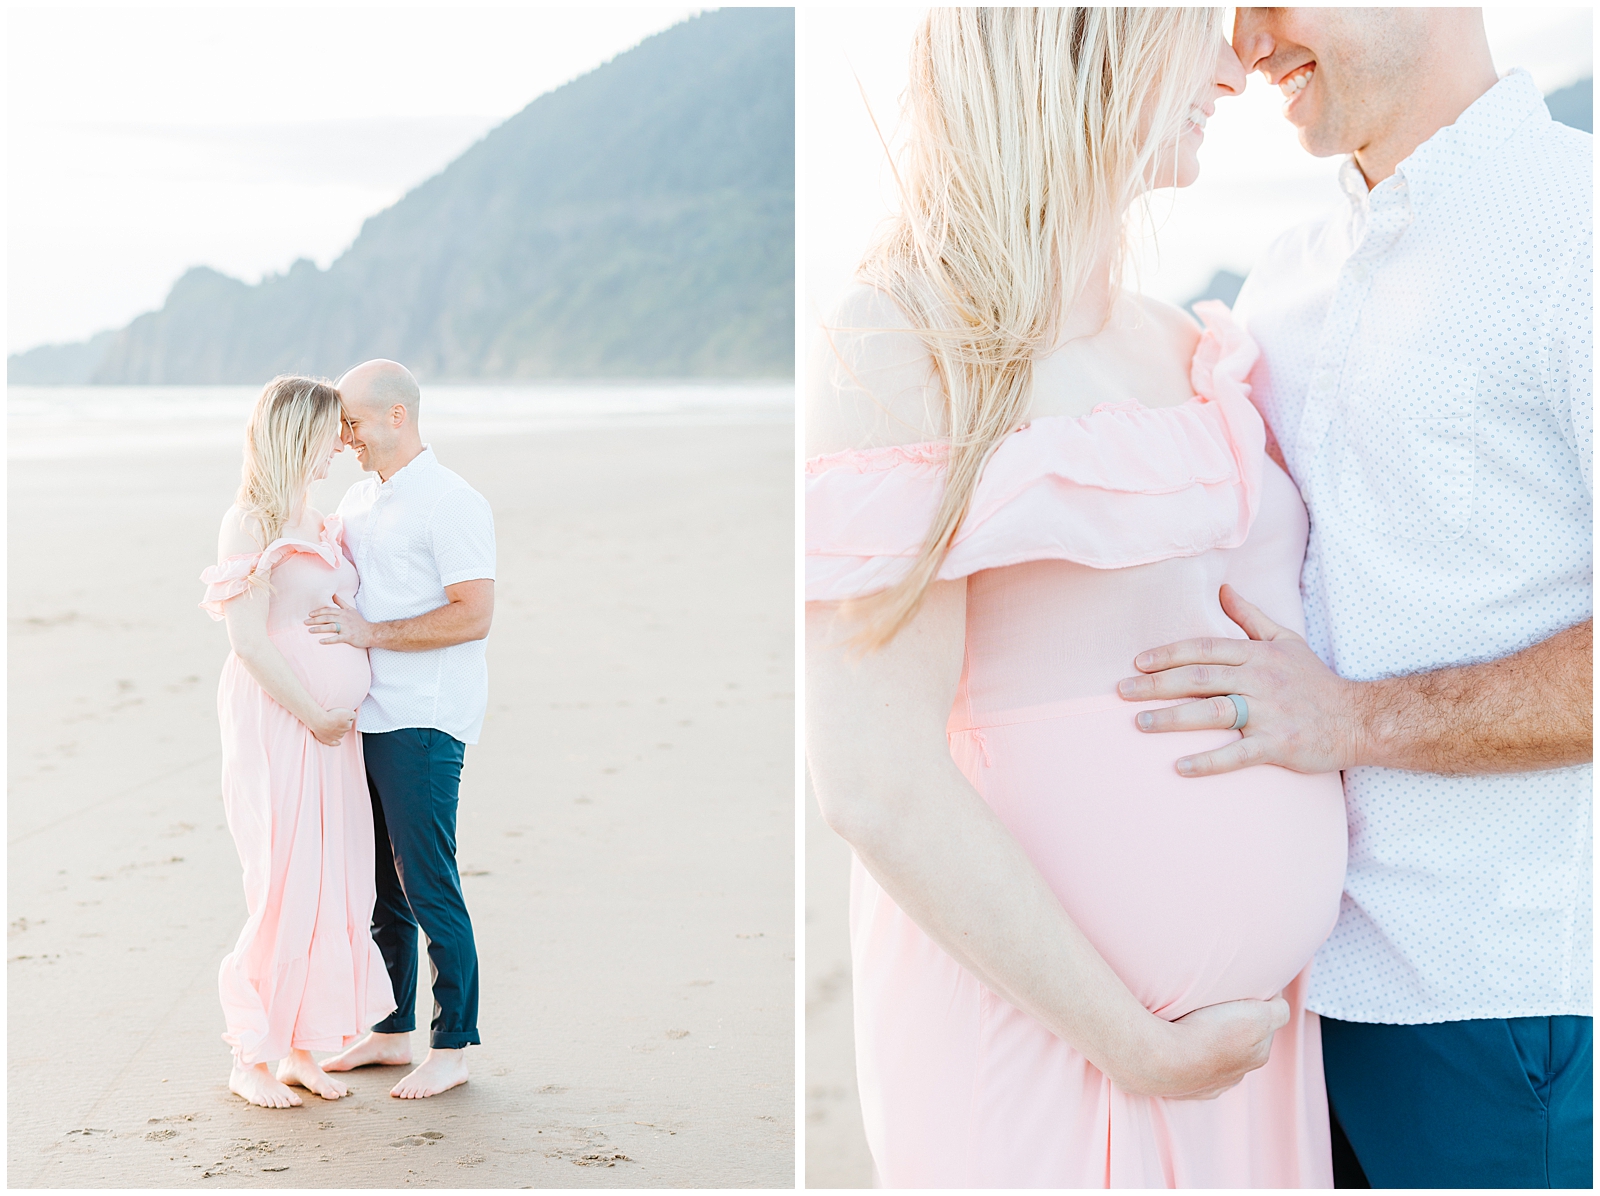 Oregon Coast Beach Maternity Session in Blush Dress and Navy 